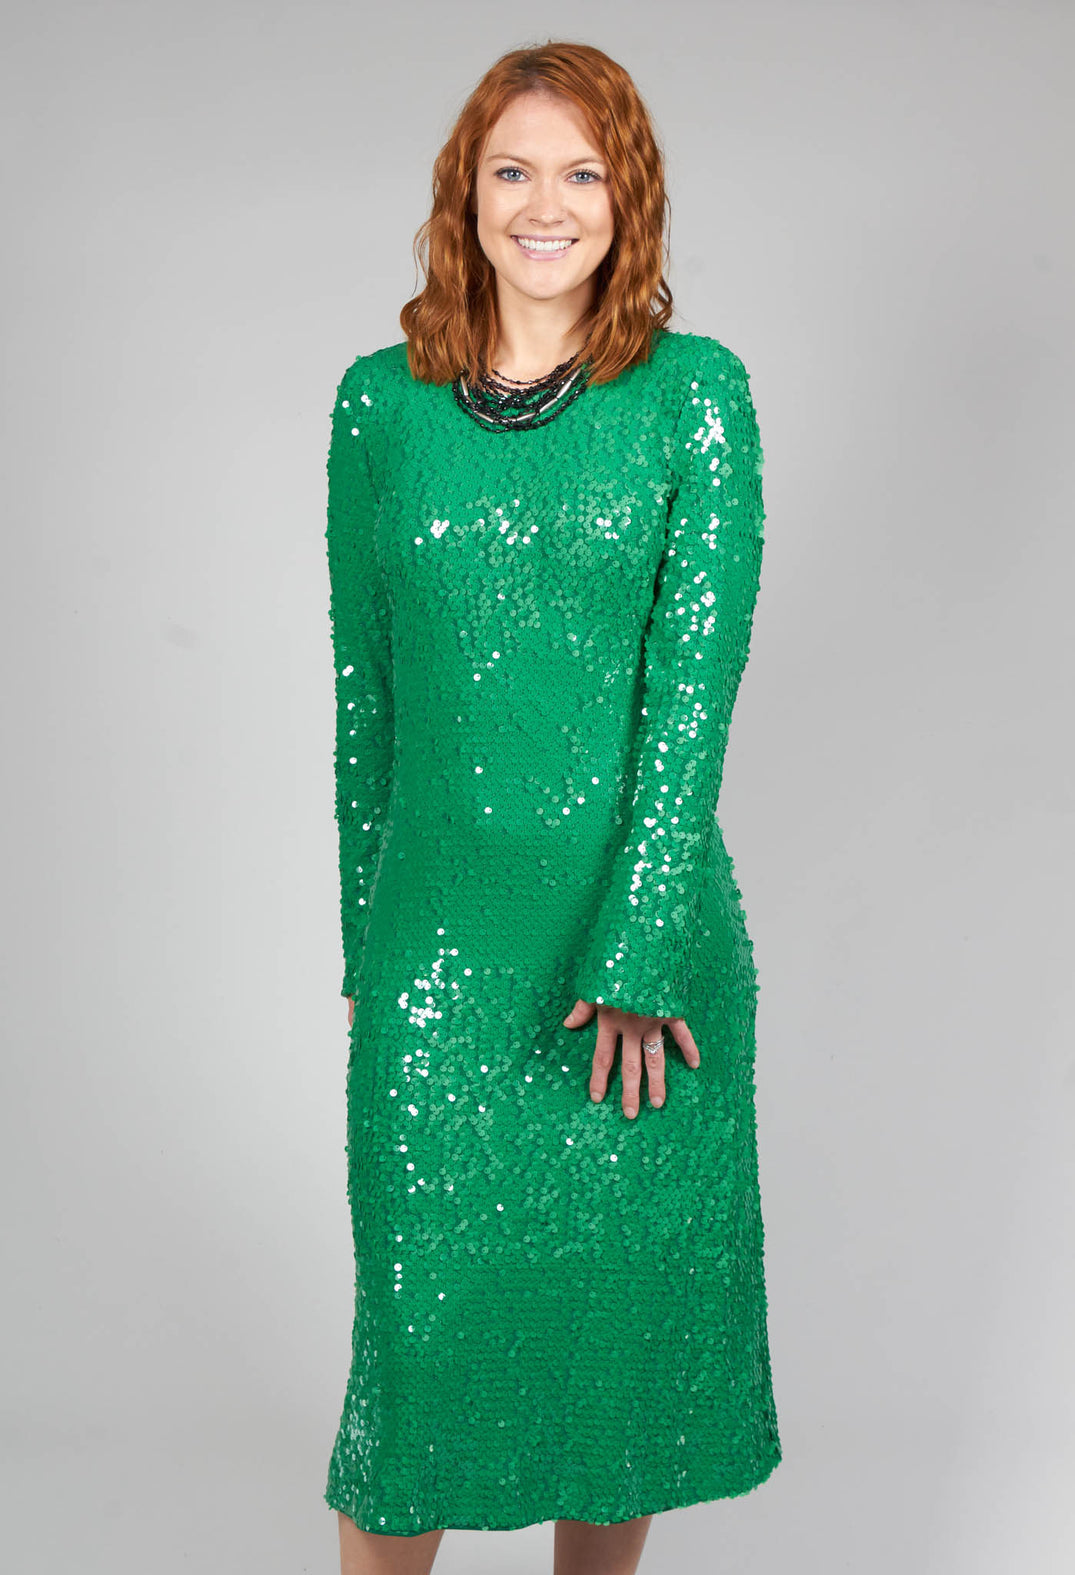 lady smiling in her green sequin detail dress